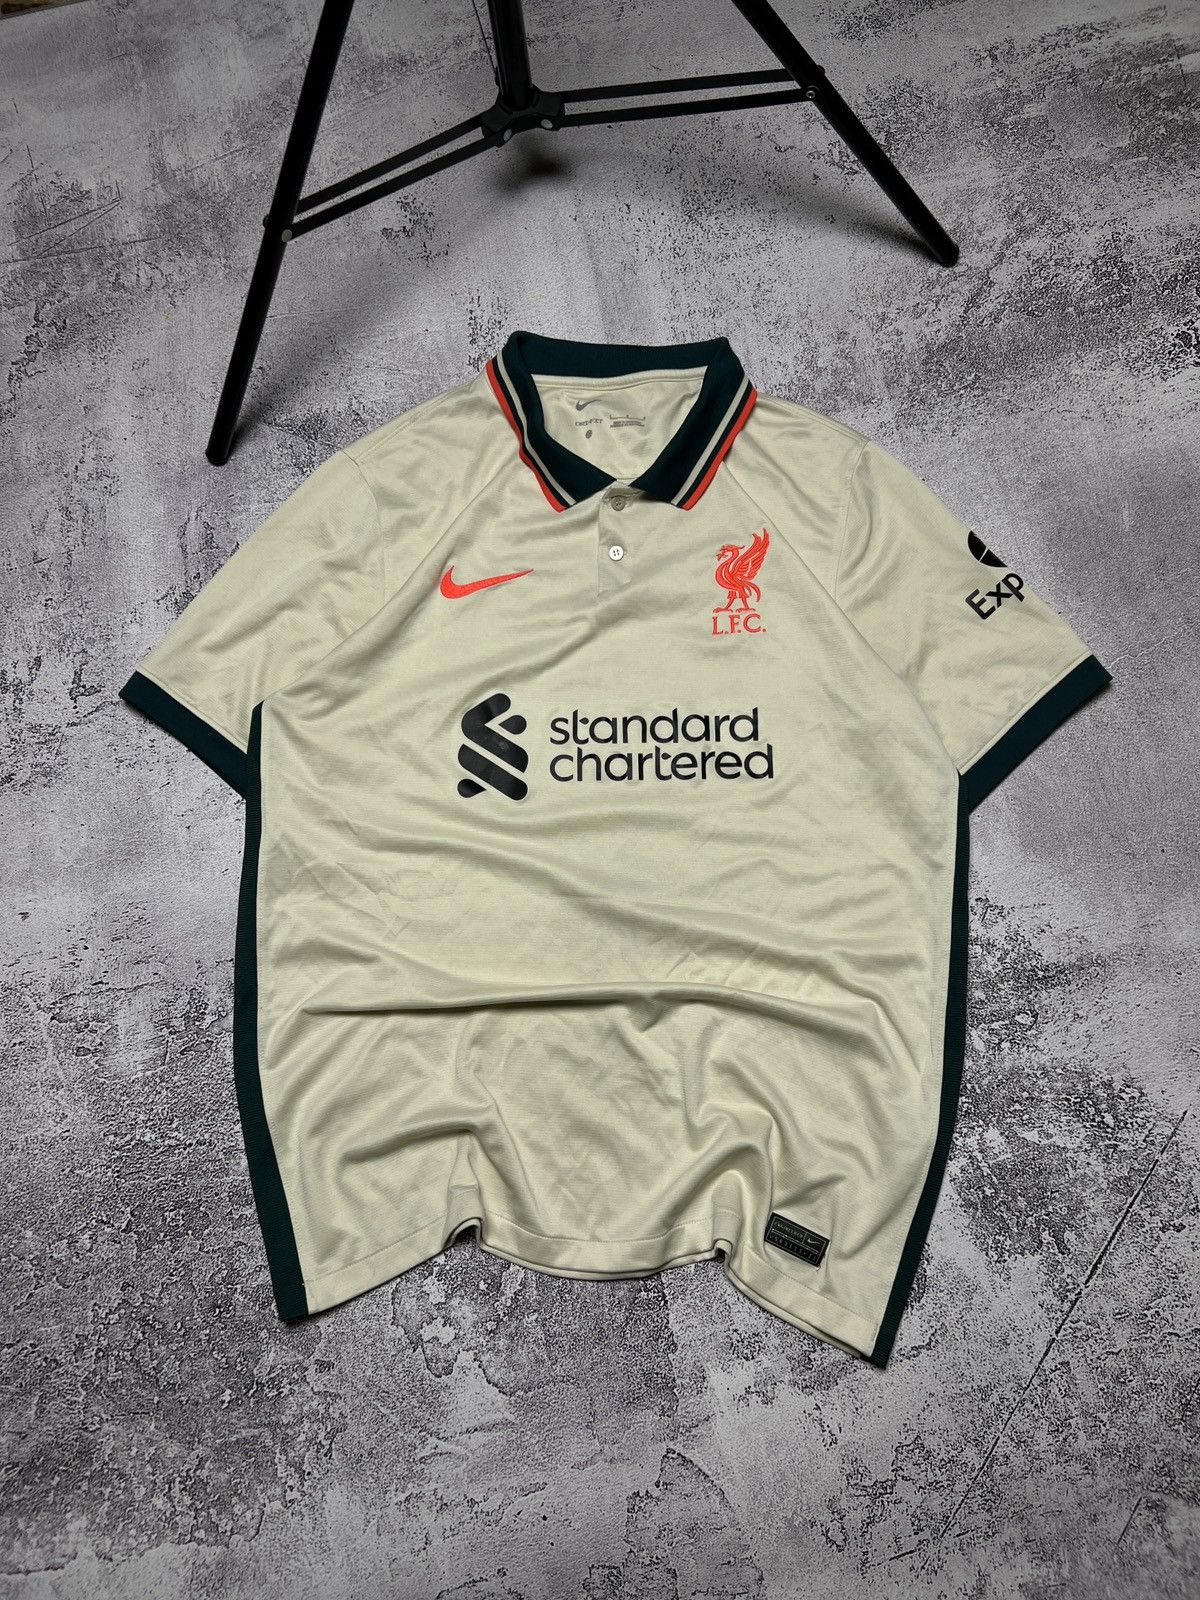 Pre-owned Liverpool X Nike Liverpool Nike Soccer Jersey L Size Standard Chartered In Cream